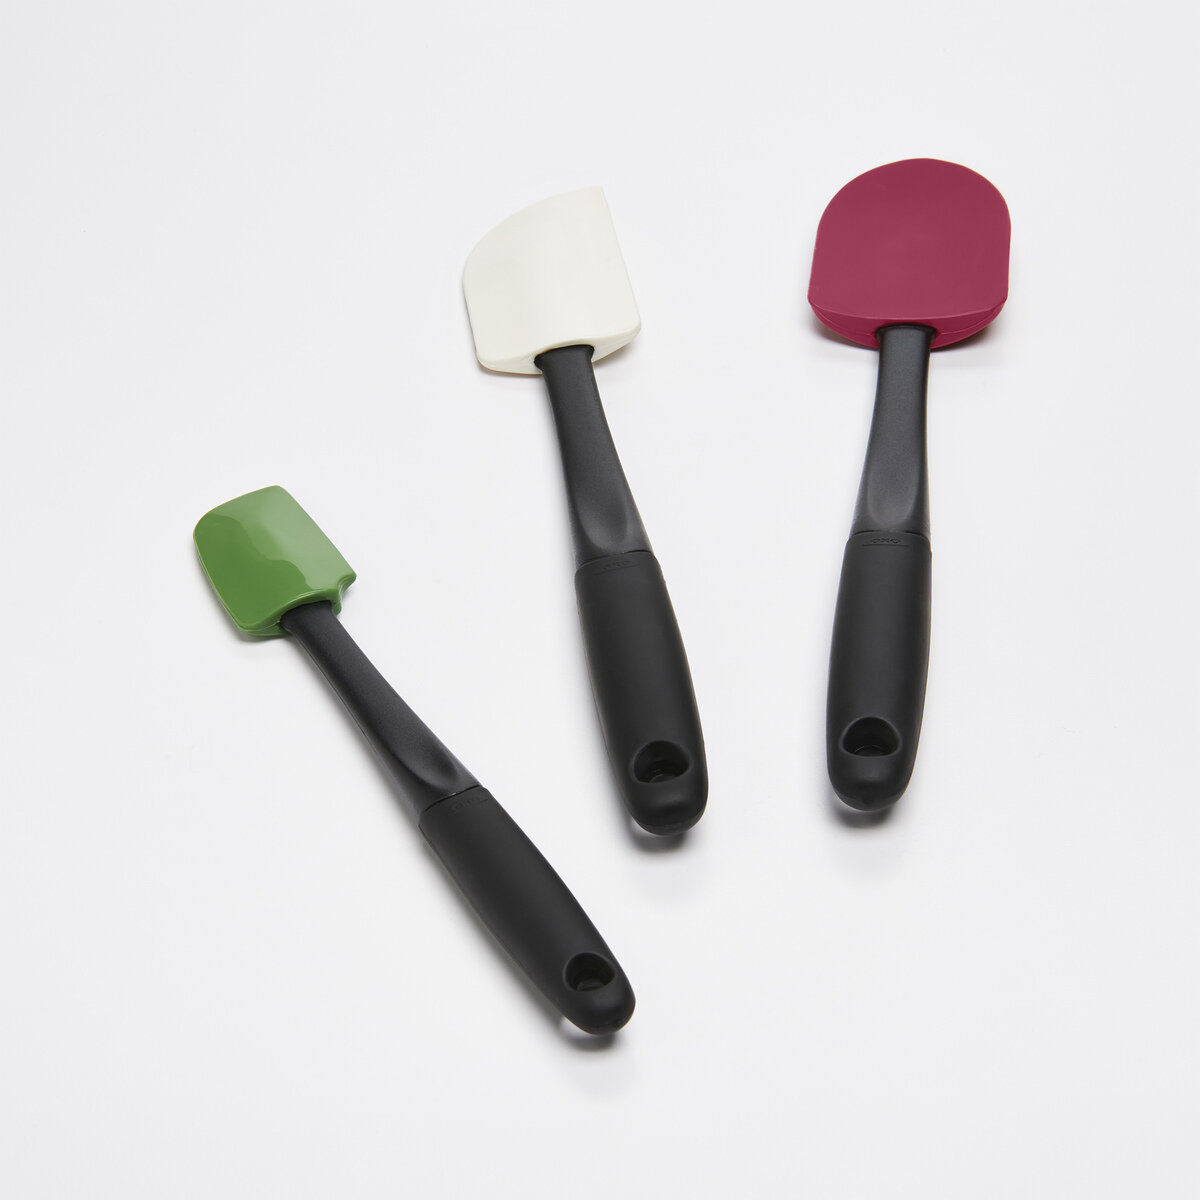  OXO Good Grips Silicone Small Spatula - Oat: Home & Kitchen